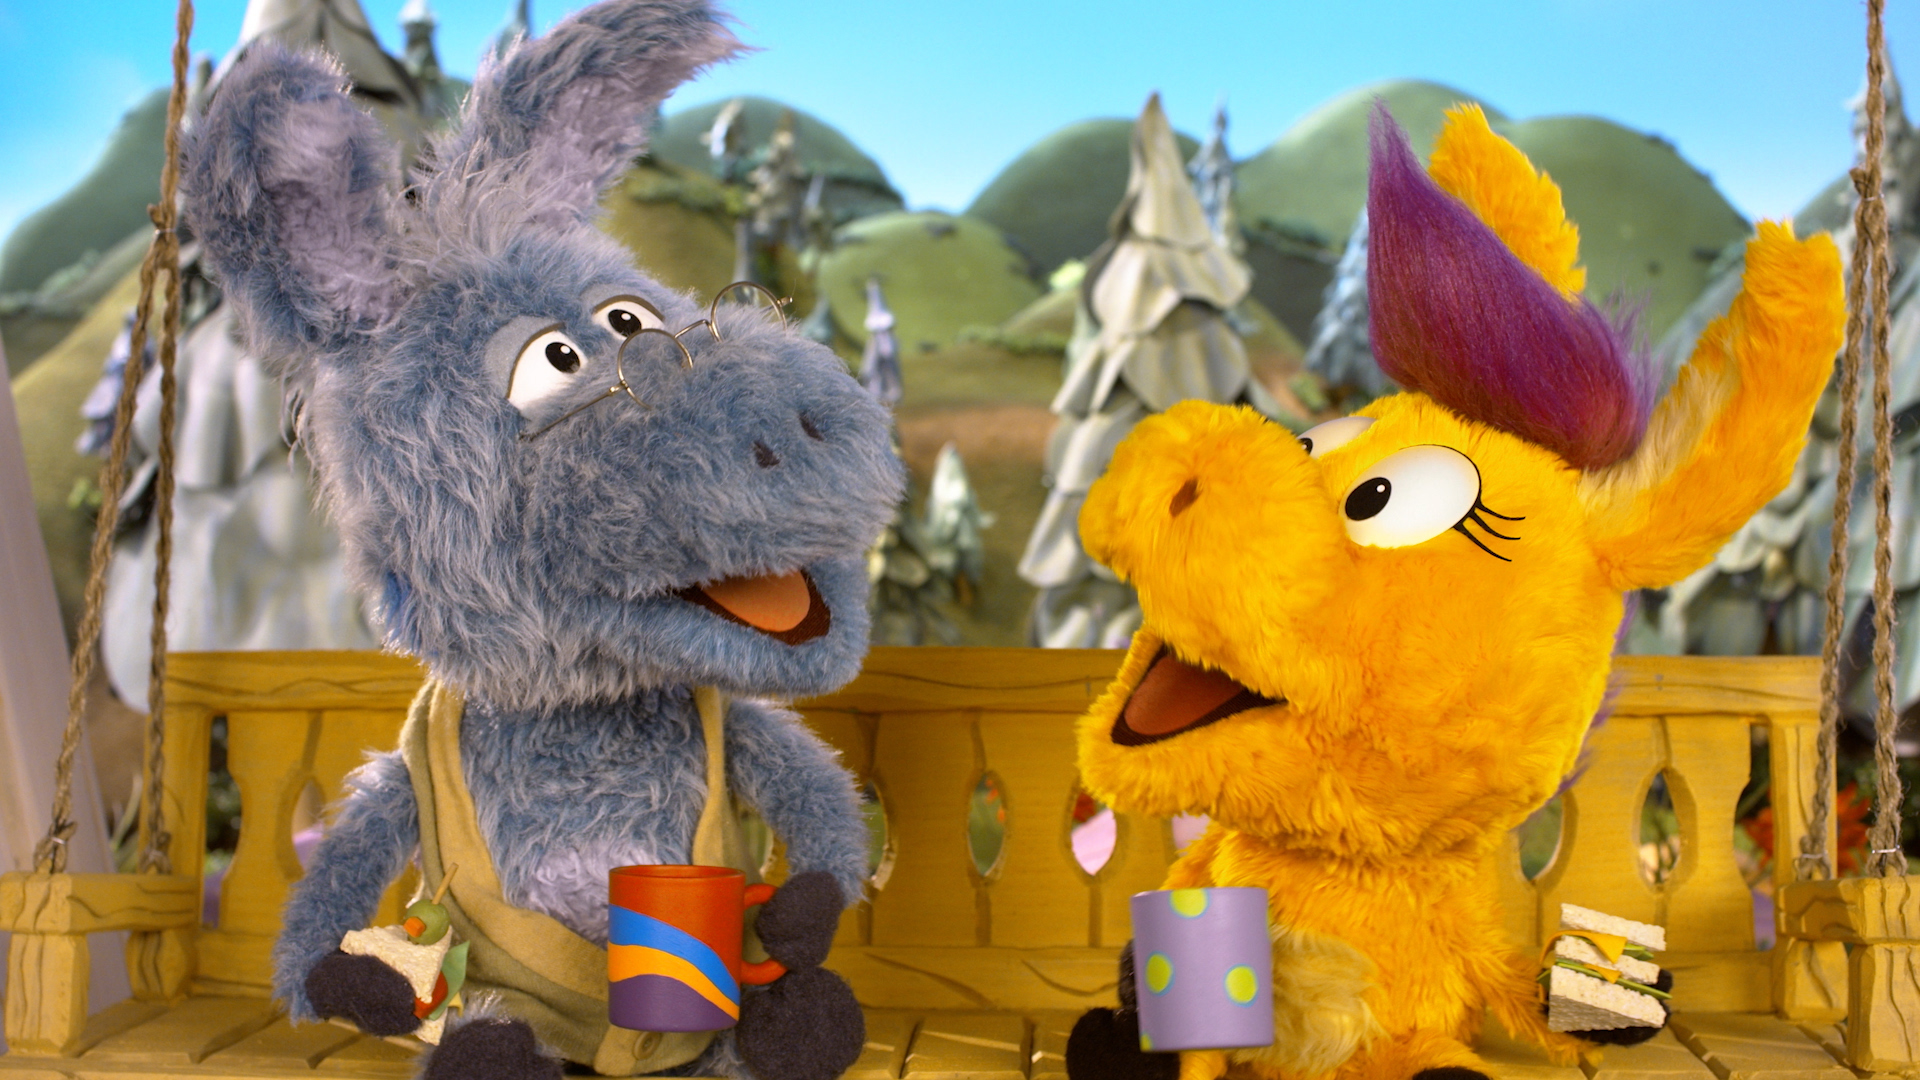 Two Donkey Hodie characters, puppet donkeys, one gray wearing glasses and the other yellow with pink hair, holding cups and sandwiches while chatting. They are seated on a bench against an animated backdrop of trees and mountains.